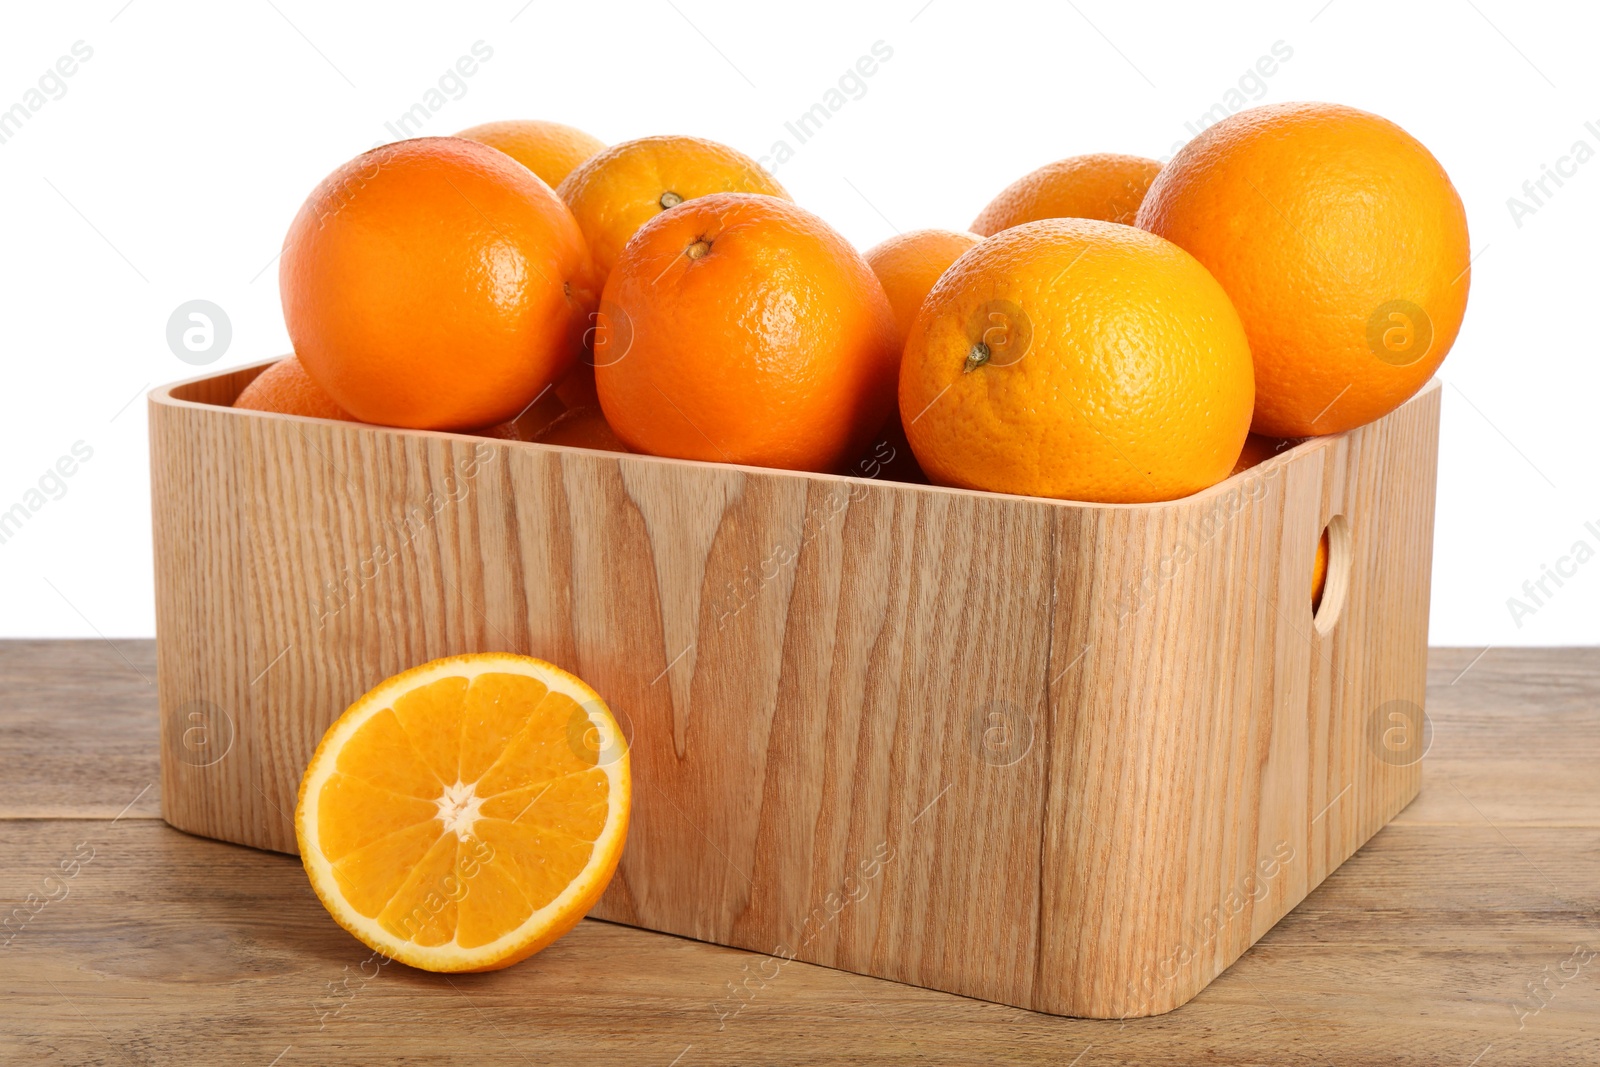 Photo of Fresh oranges in crate on wooden table against white background